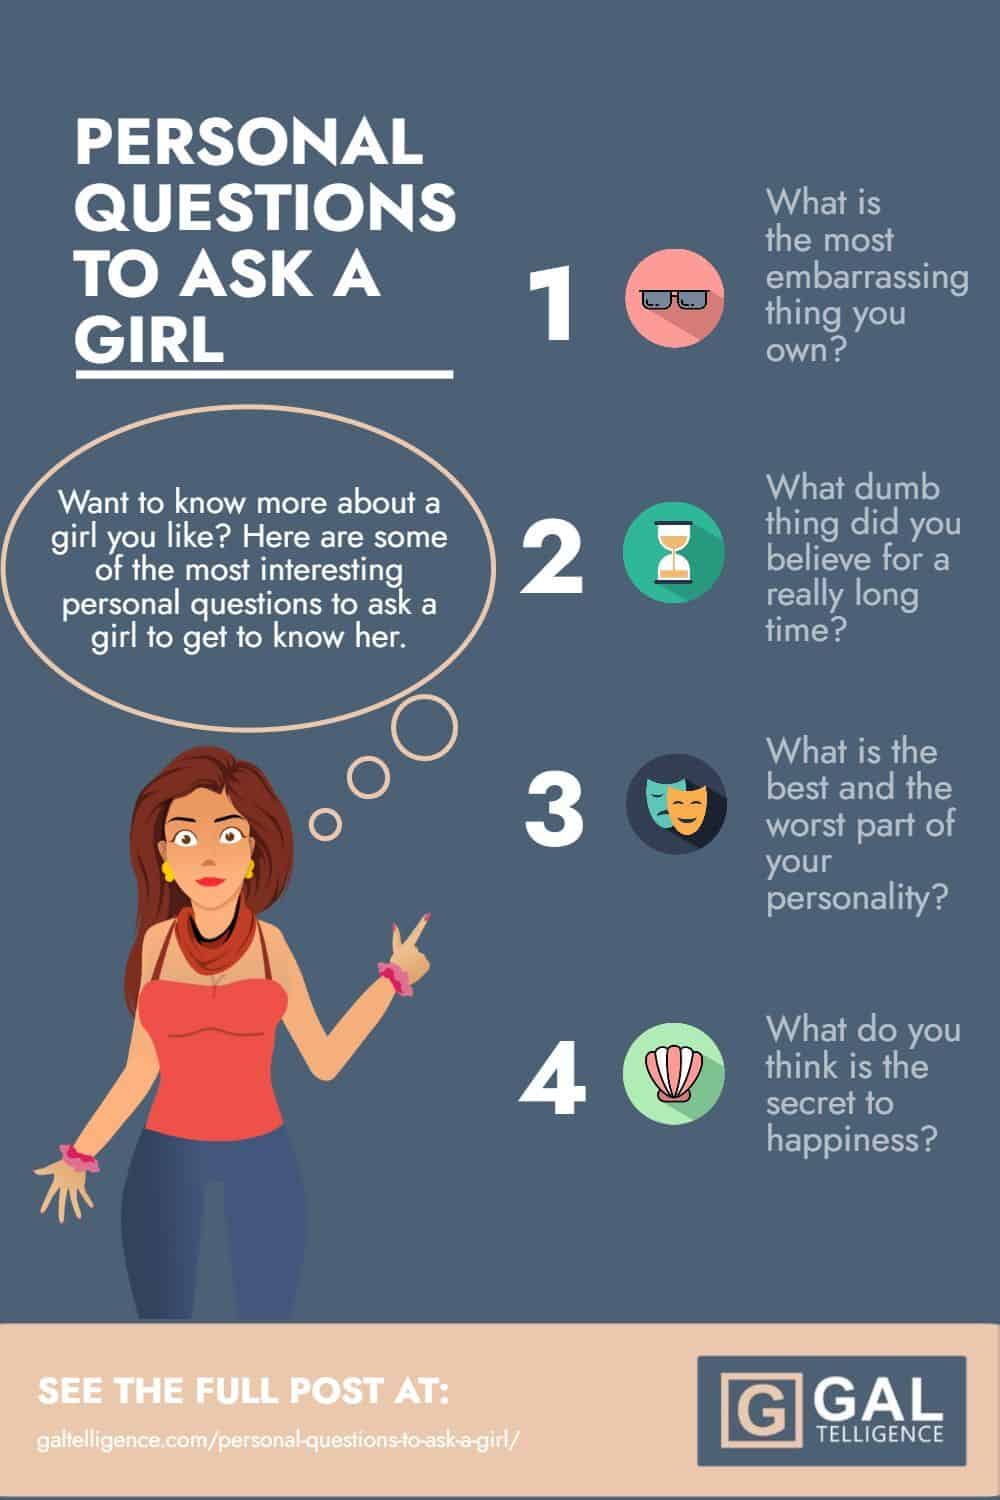 Personal questions to ask a girl - Infographic